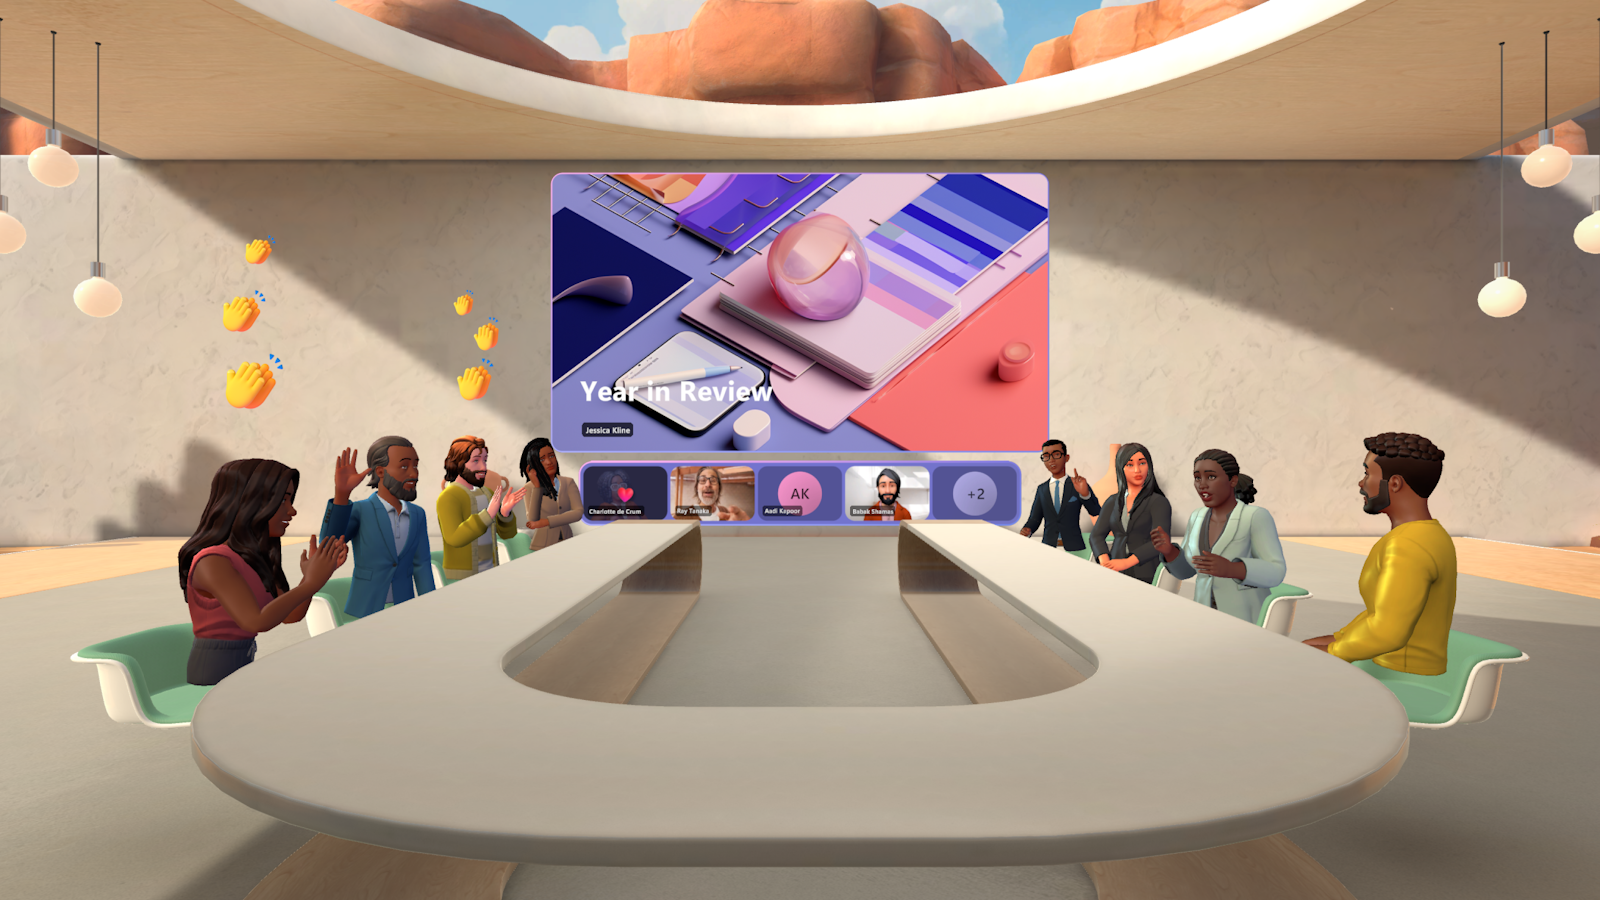 An image of people doing a Teams meeting in Immersive space.